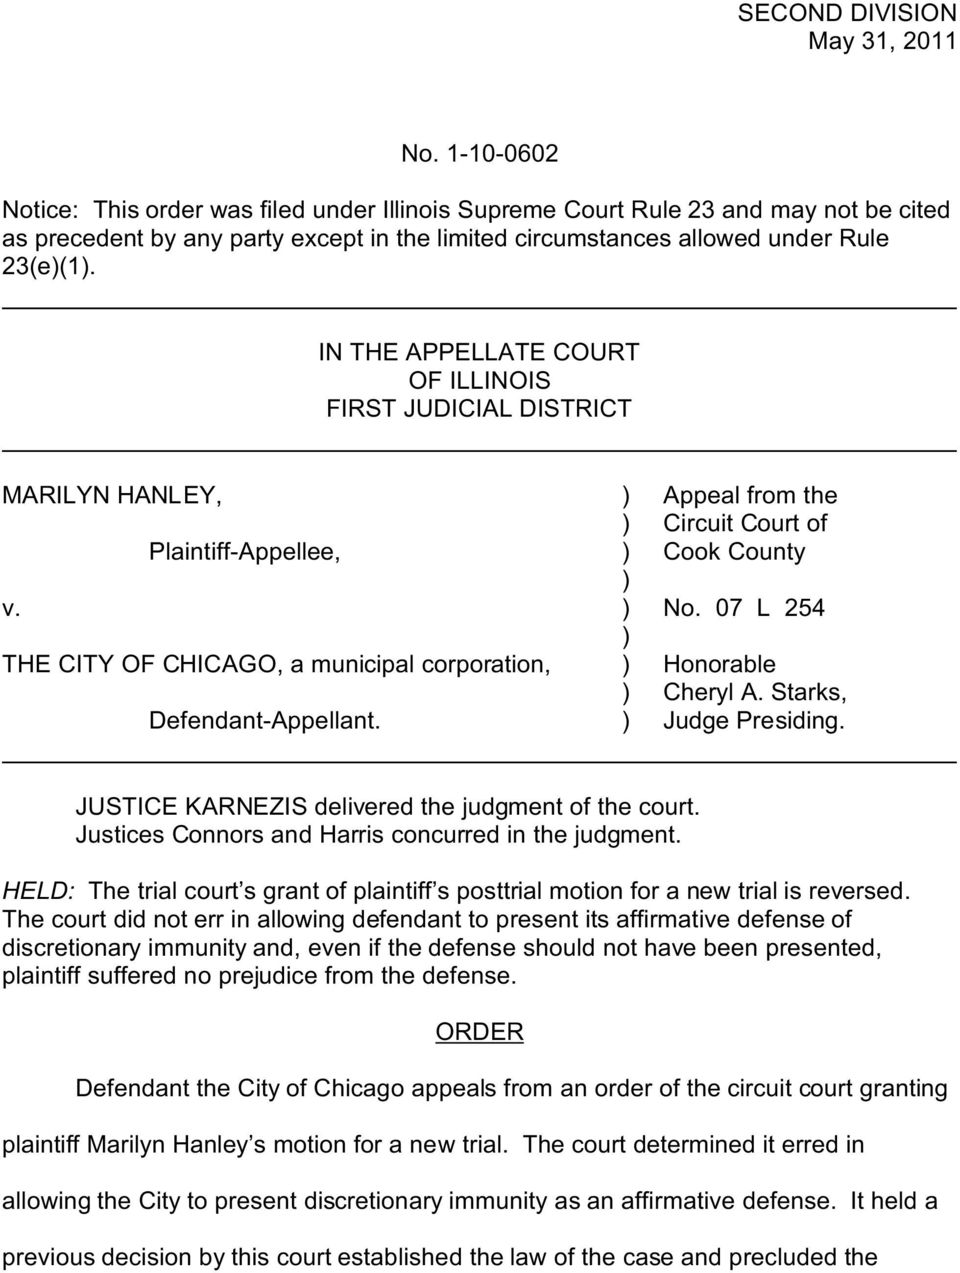 IN THE APPELLATE COURT OF ILLINOIS FIRST JUDICIAL DISTRICT MARILYN HANLEY, Plaintiff-Appellee, v. THE CITY OF CHICAGO, a municipal corporation, Defendant-Appellant.